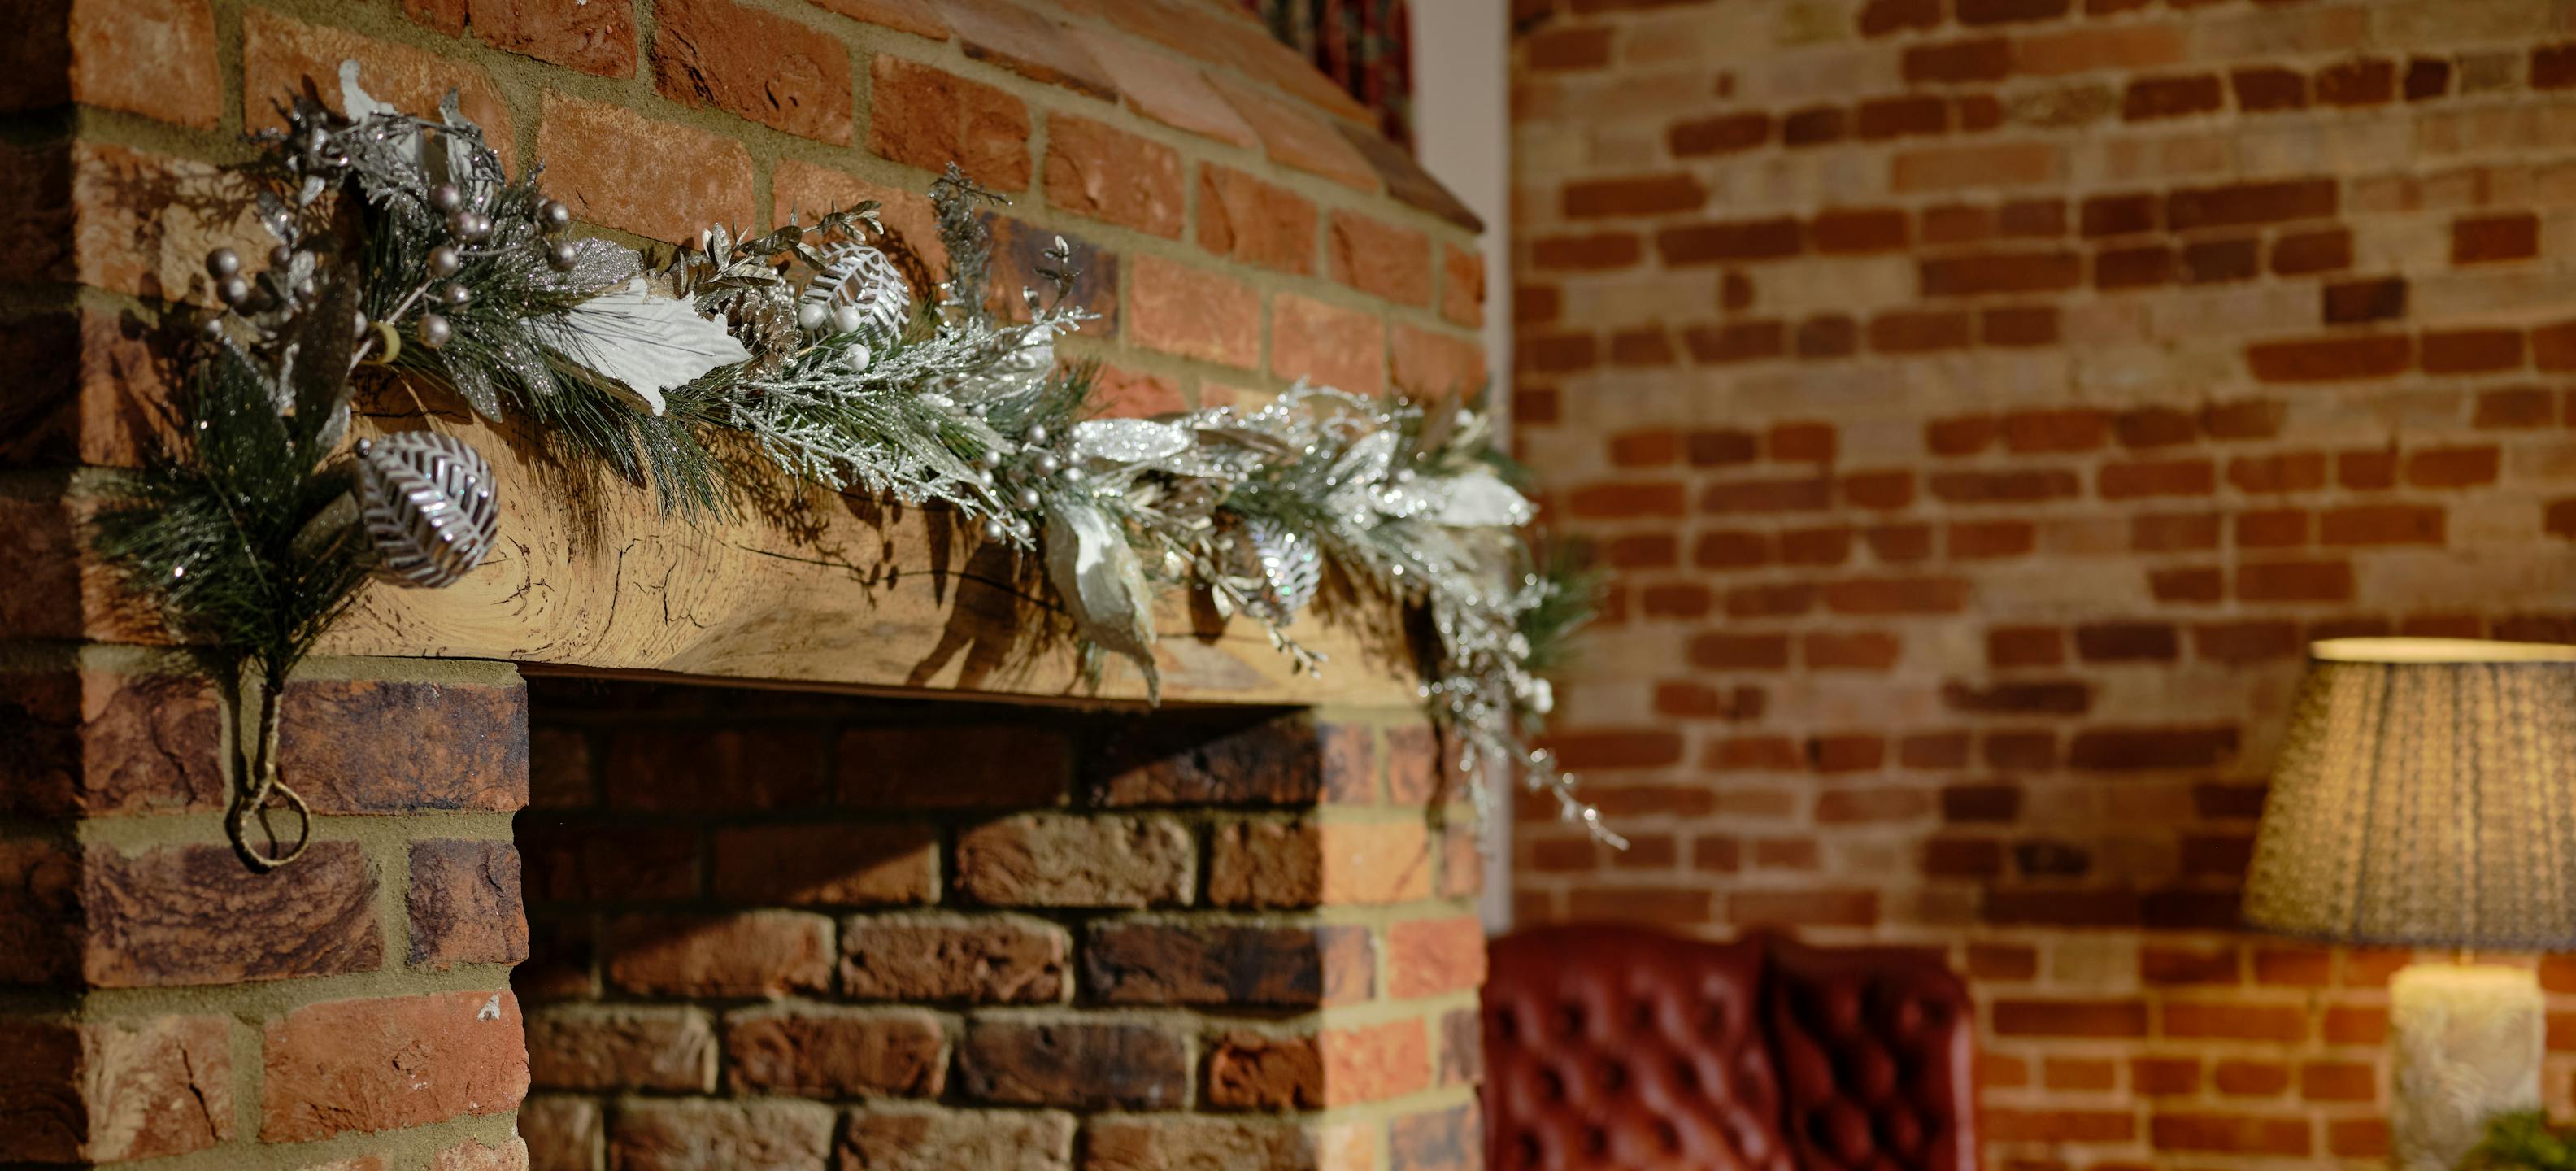 Champagne celebrations garland over fireplace